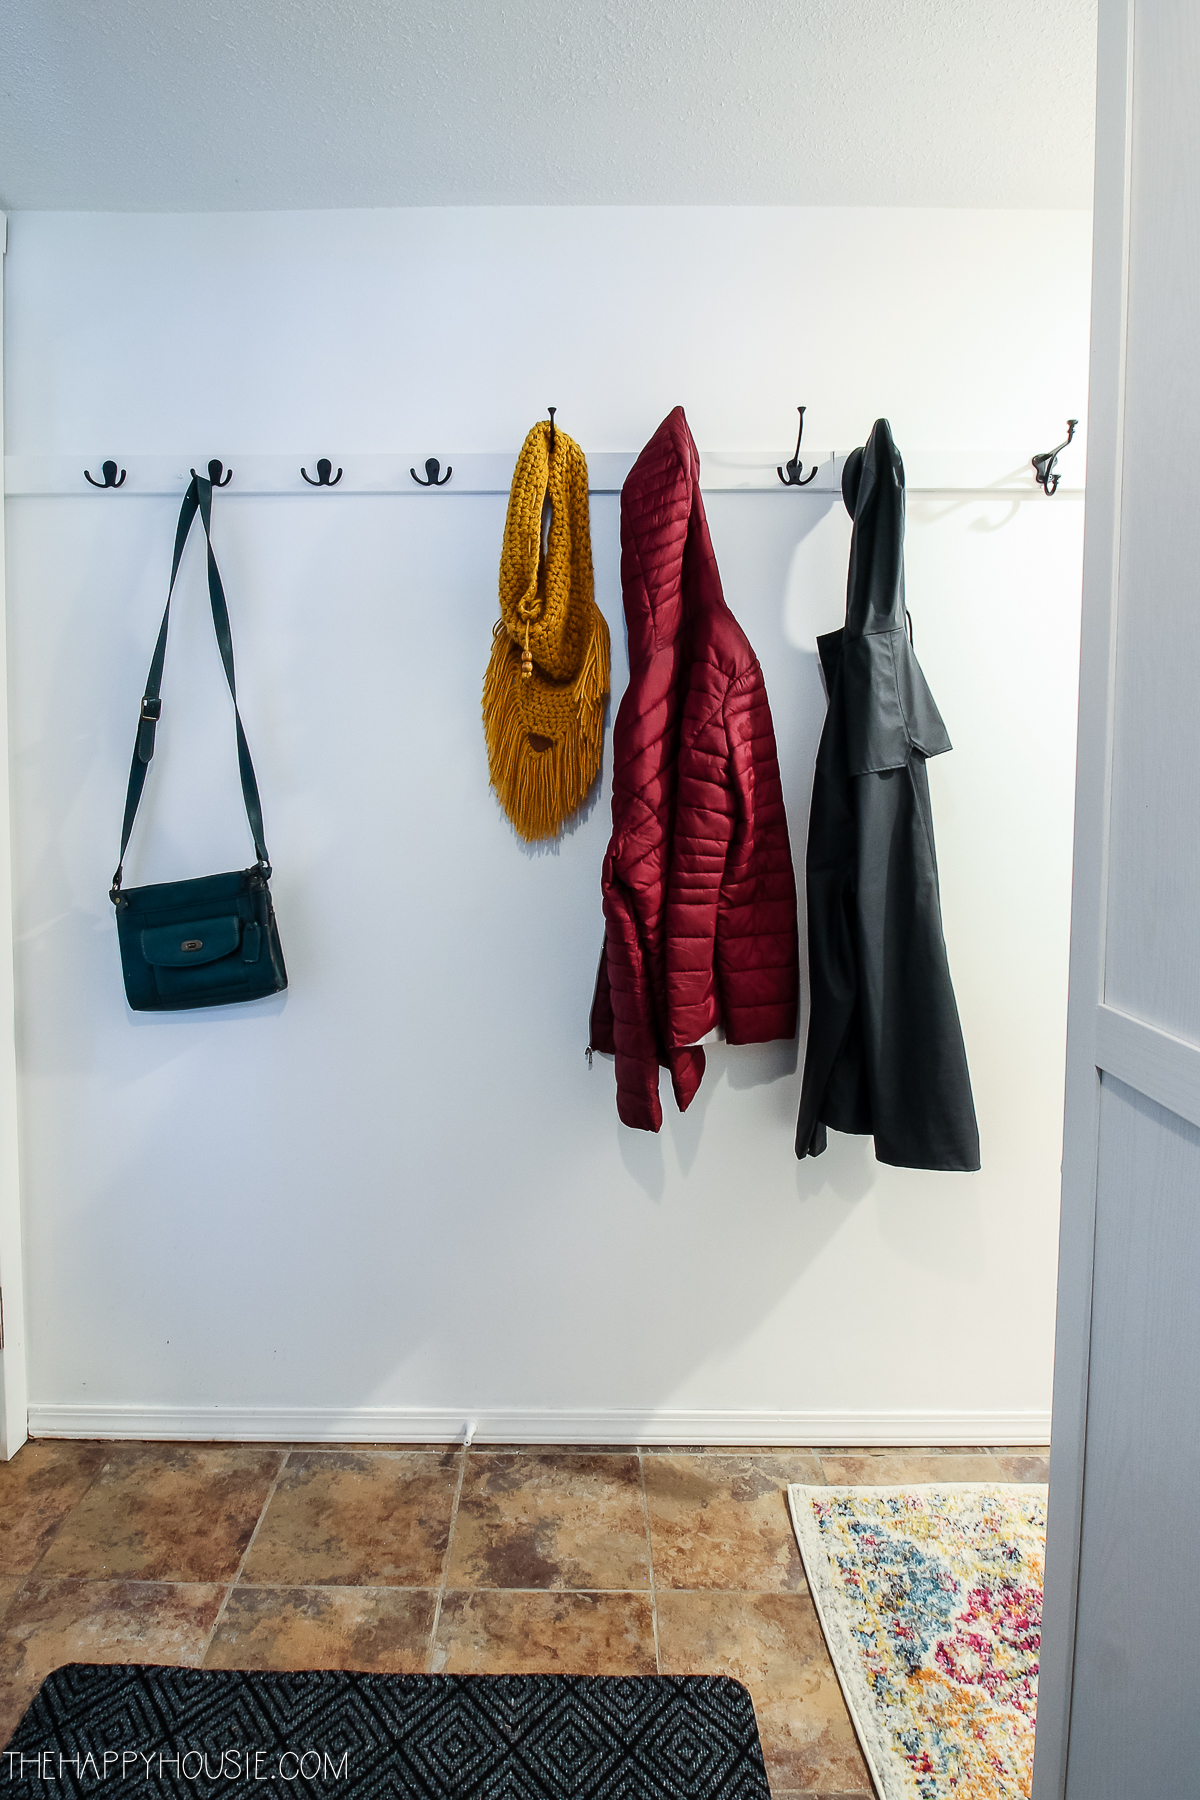 Coats and purses are on the hooks in the hallway.